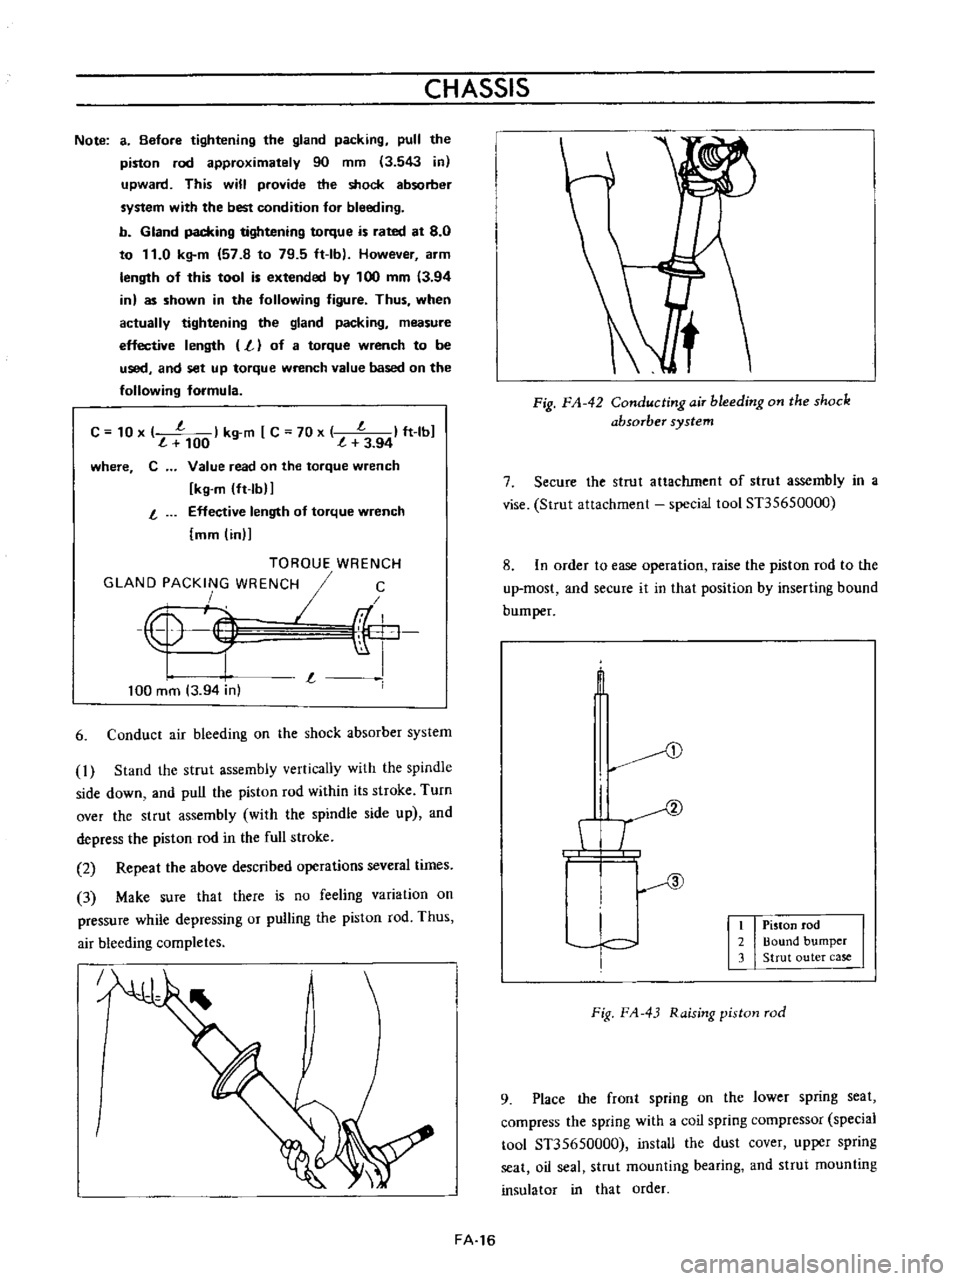 DATSUN B110 1973  Service Repair Manual 
CHASSIS

Note 
a 
Before

tightening 
the

gland 
packing

pull 
the

piston 
rod

approximately 
90 
mm 
3 
543 
in

upward 
This 
will

provide 
the 
shock 
absorber

system 
with 
the 
best 
condi